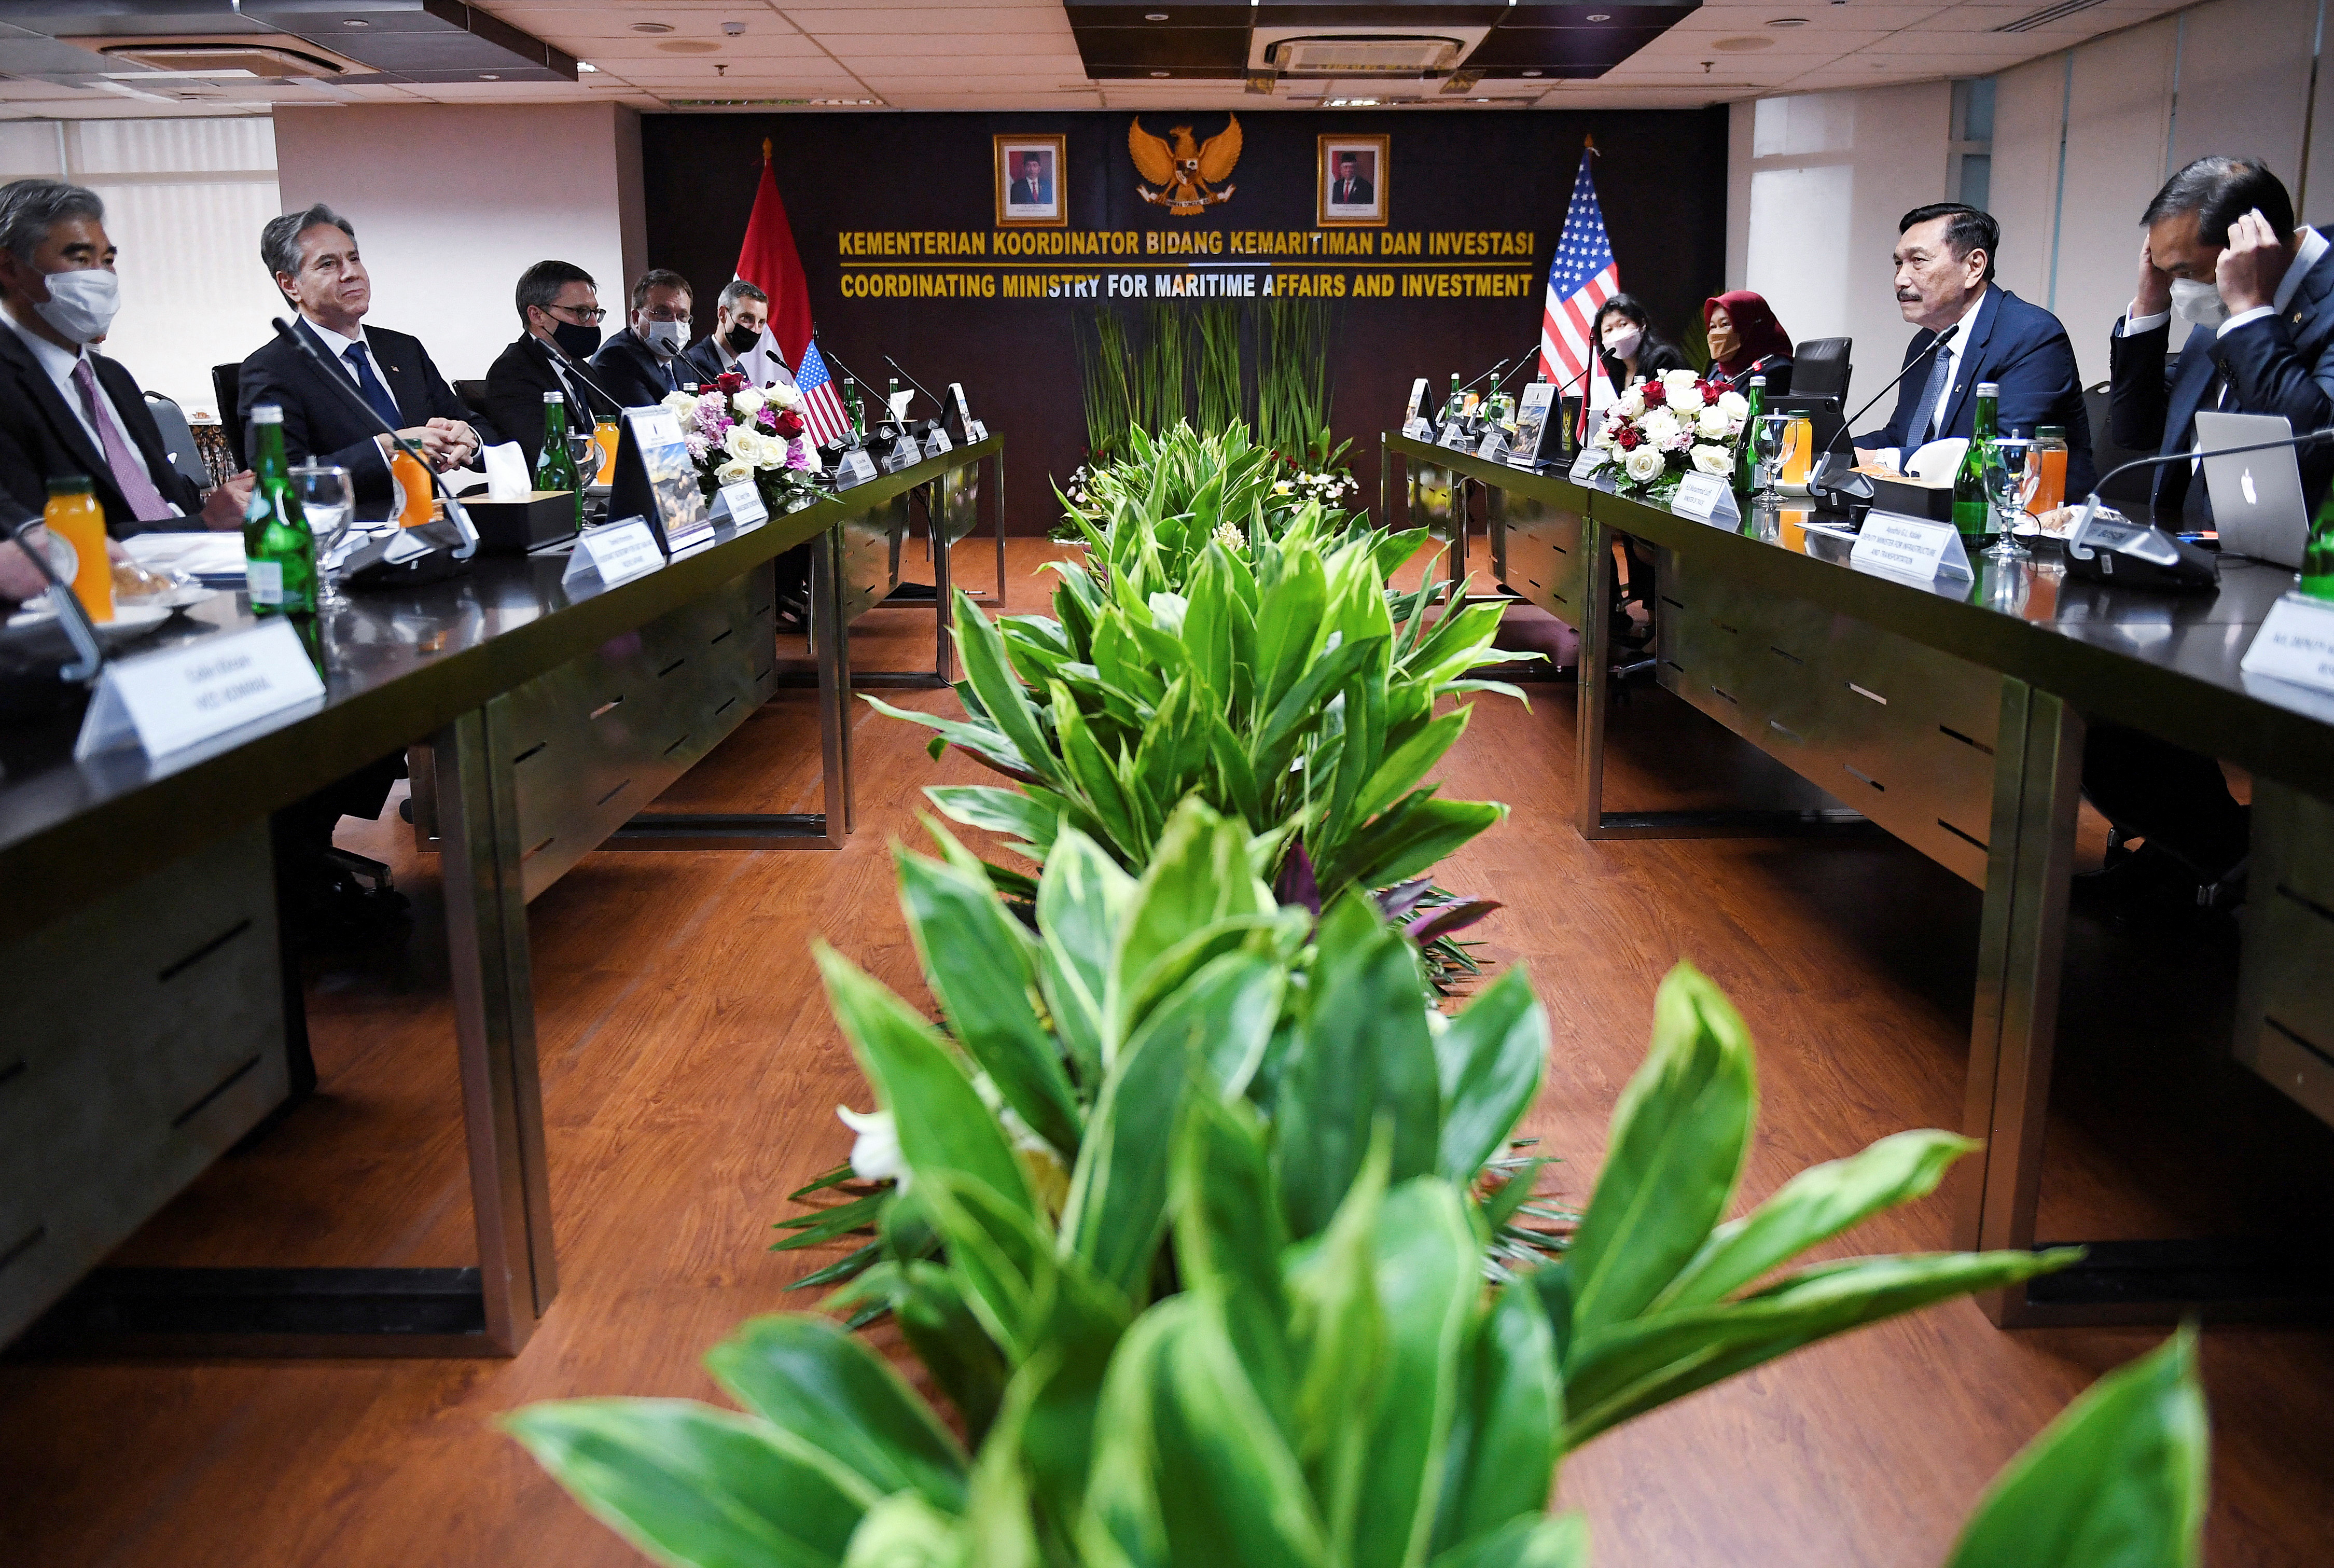 U.S. Secretary of State Antony Blinken meets with the Coordinating Minister for Maritime Affairs and Investment Luhut Binsar Pandjaitan at the Coordinating Ministry for Maritime Affairs and Investment in Jakarta